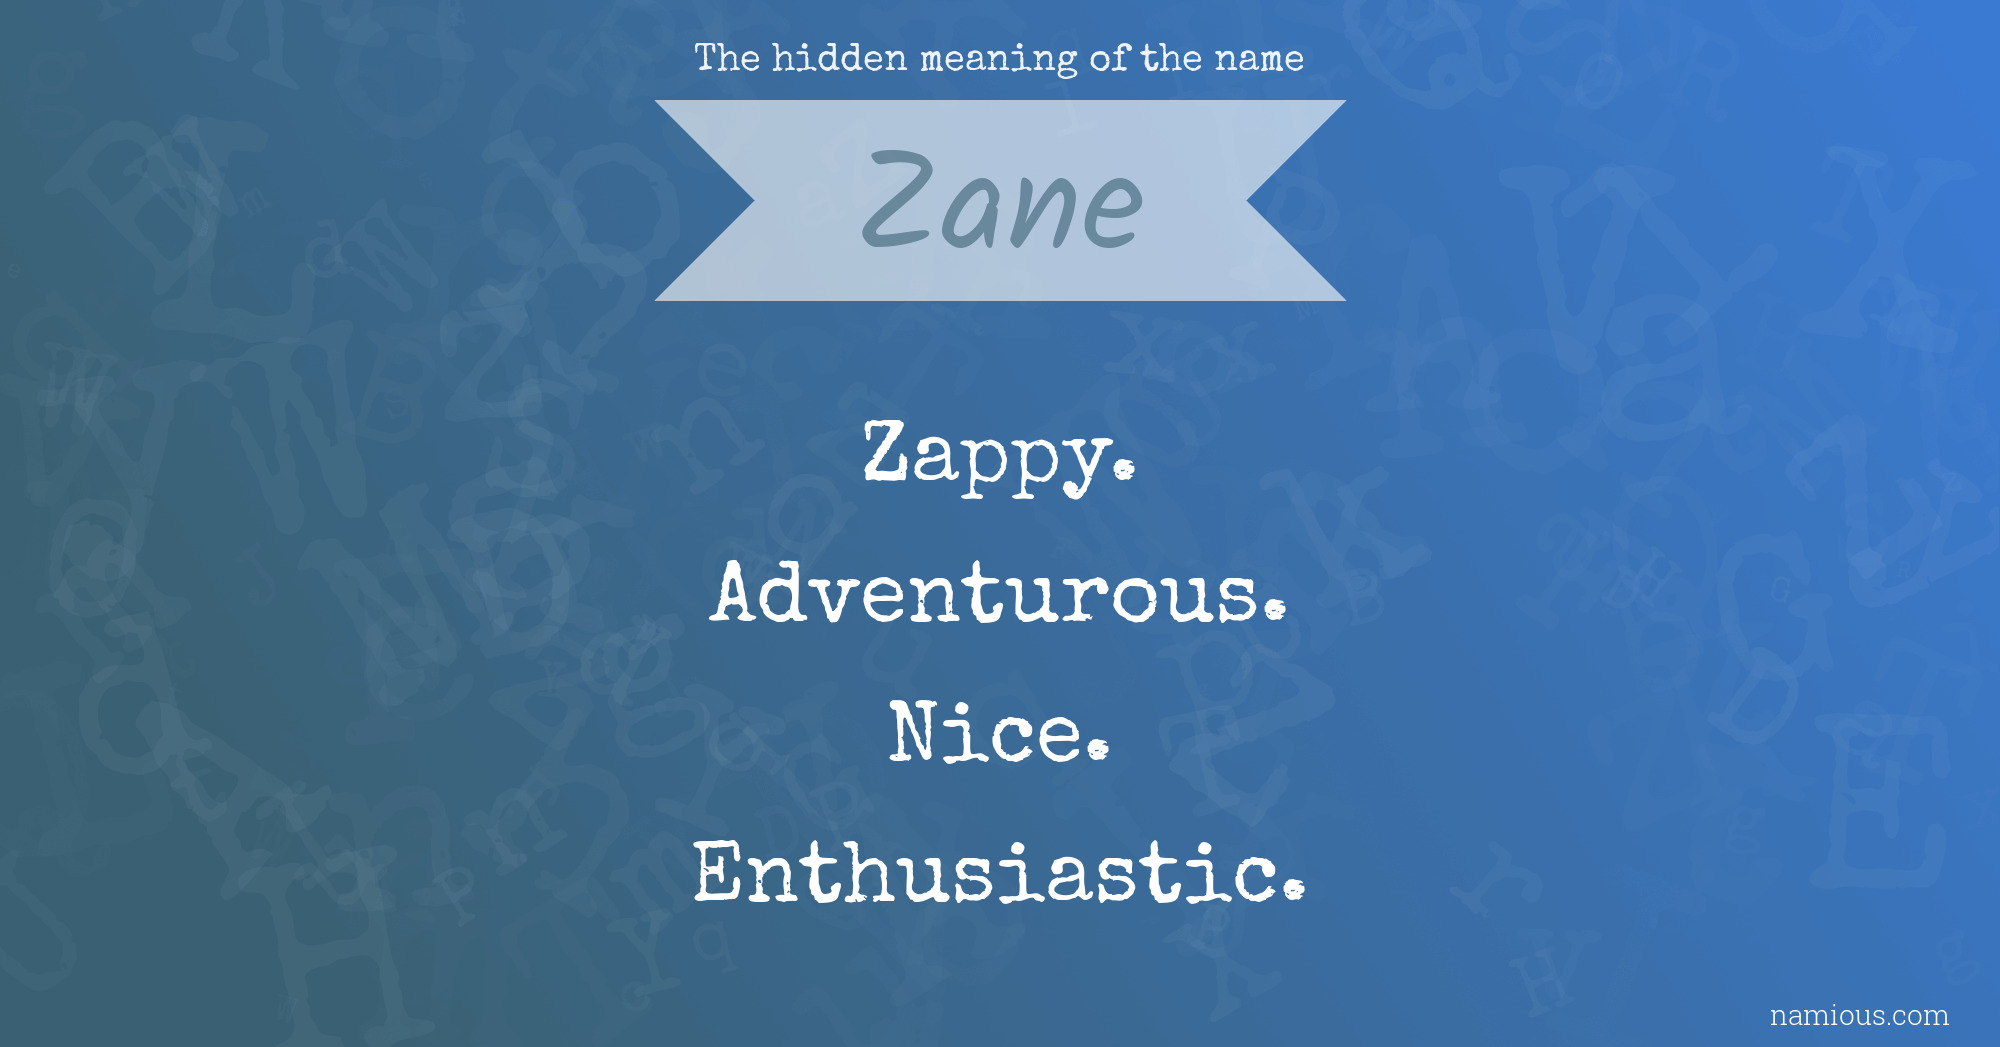 The hidden meaning of the name Zane